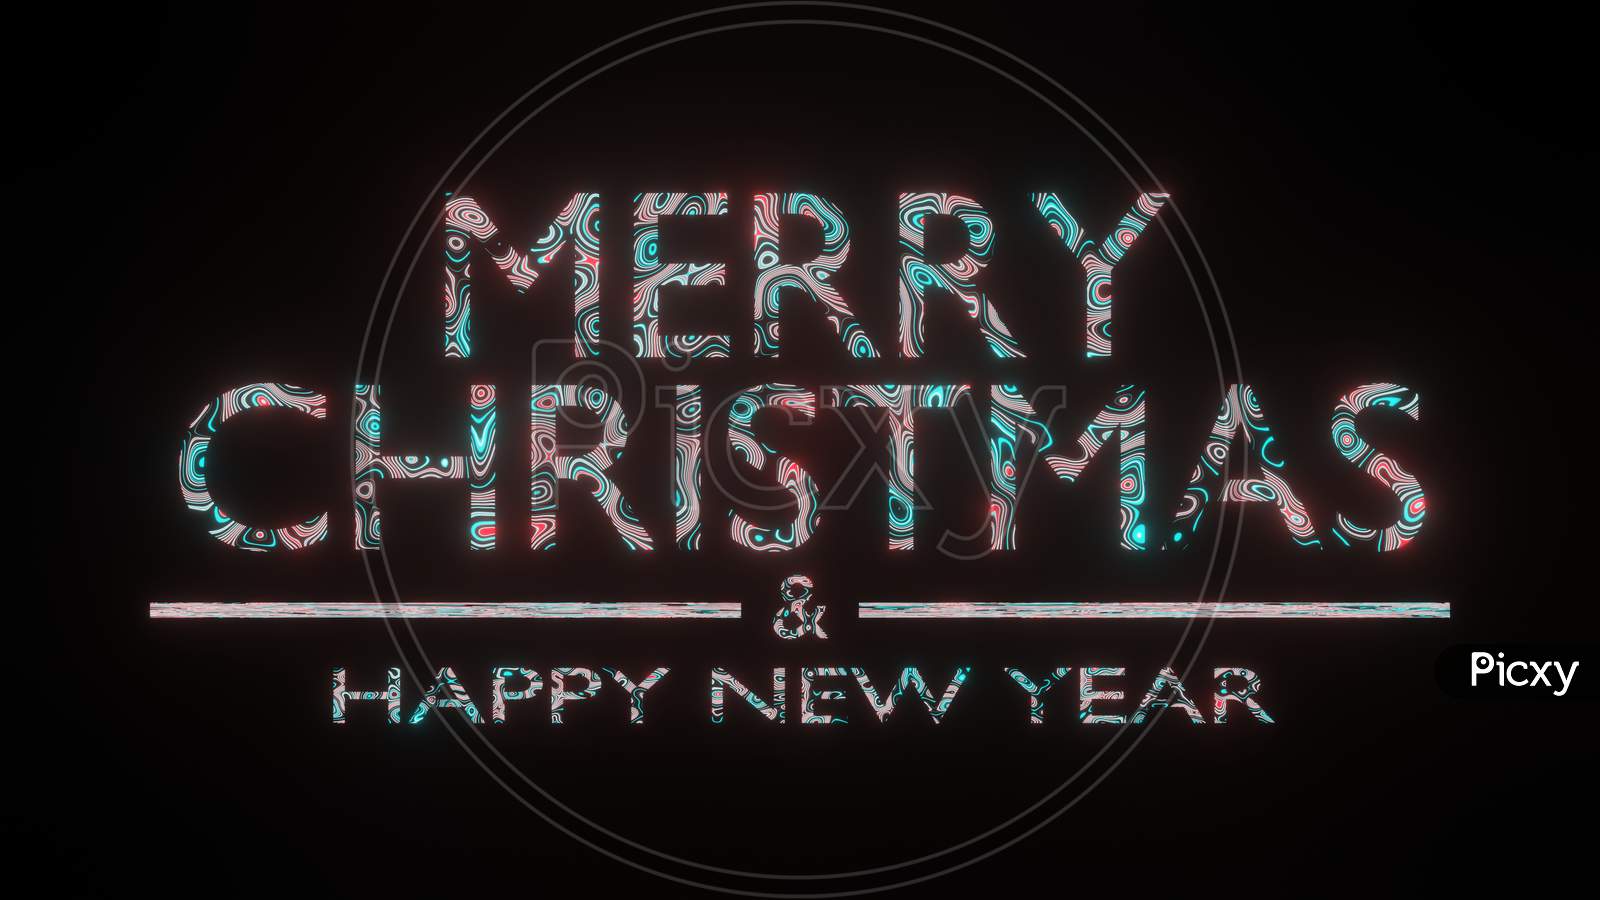 3D Illustration Graphic Of Beautiful Texture Or Pattern On The Text Merry Christmas And Happy New Year, Isolated On Black Background.